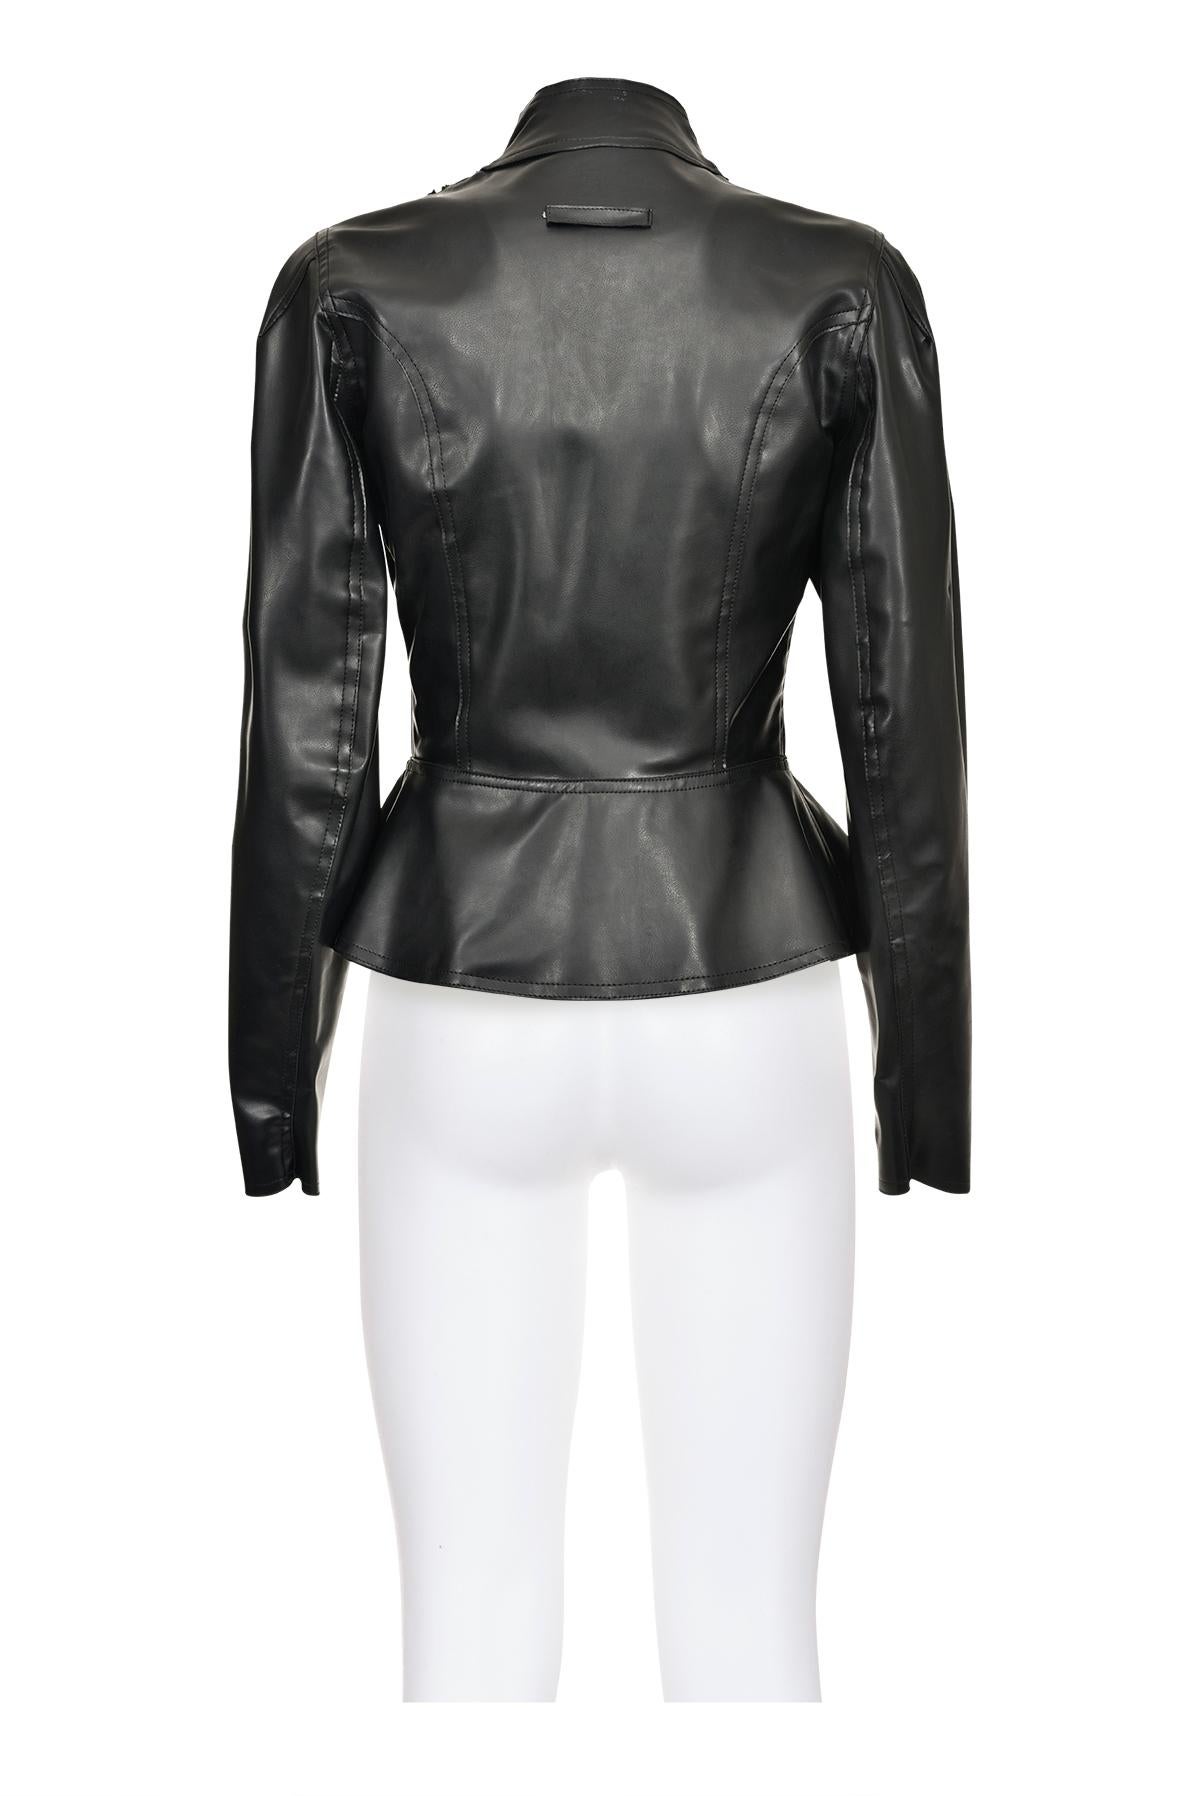 JEAN PAUL GAULTIER  FW 95 Fake Leather Bustier Jacket In Excellent Condition In Milano, MILANO